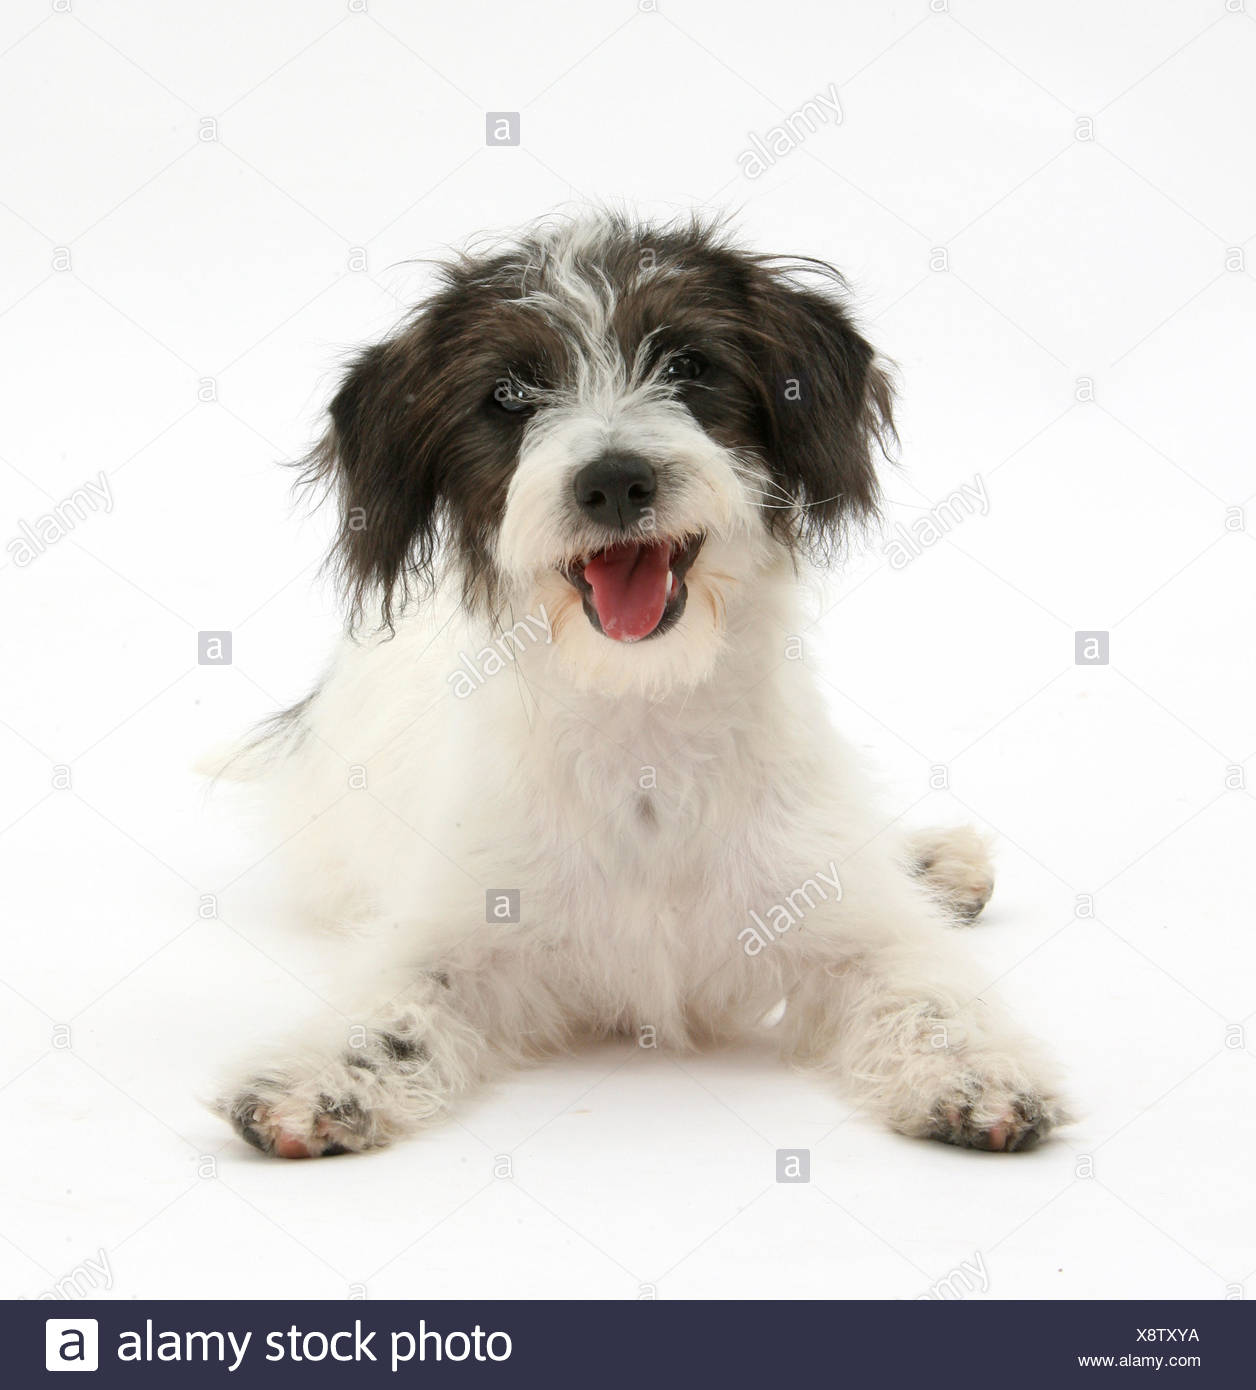 Black-and-white Jack-a-poo, Jack Russell cross Poodle puppy Stock ...